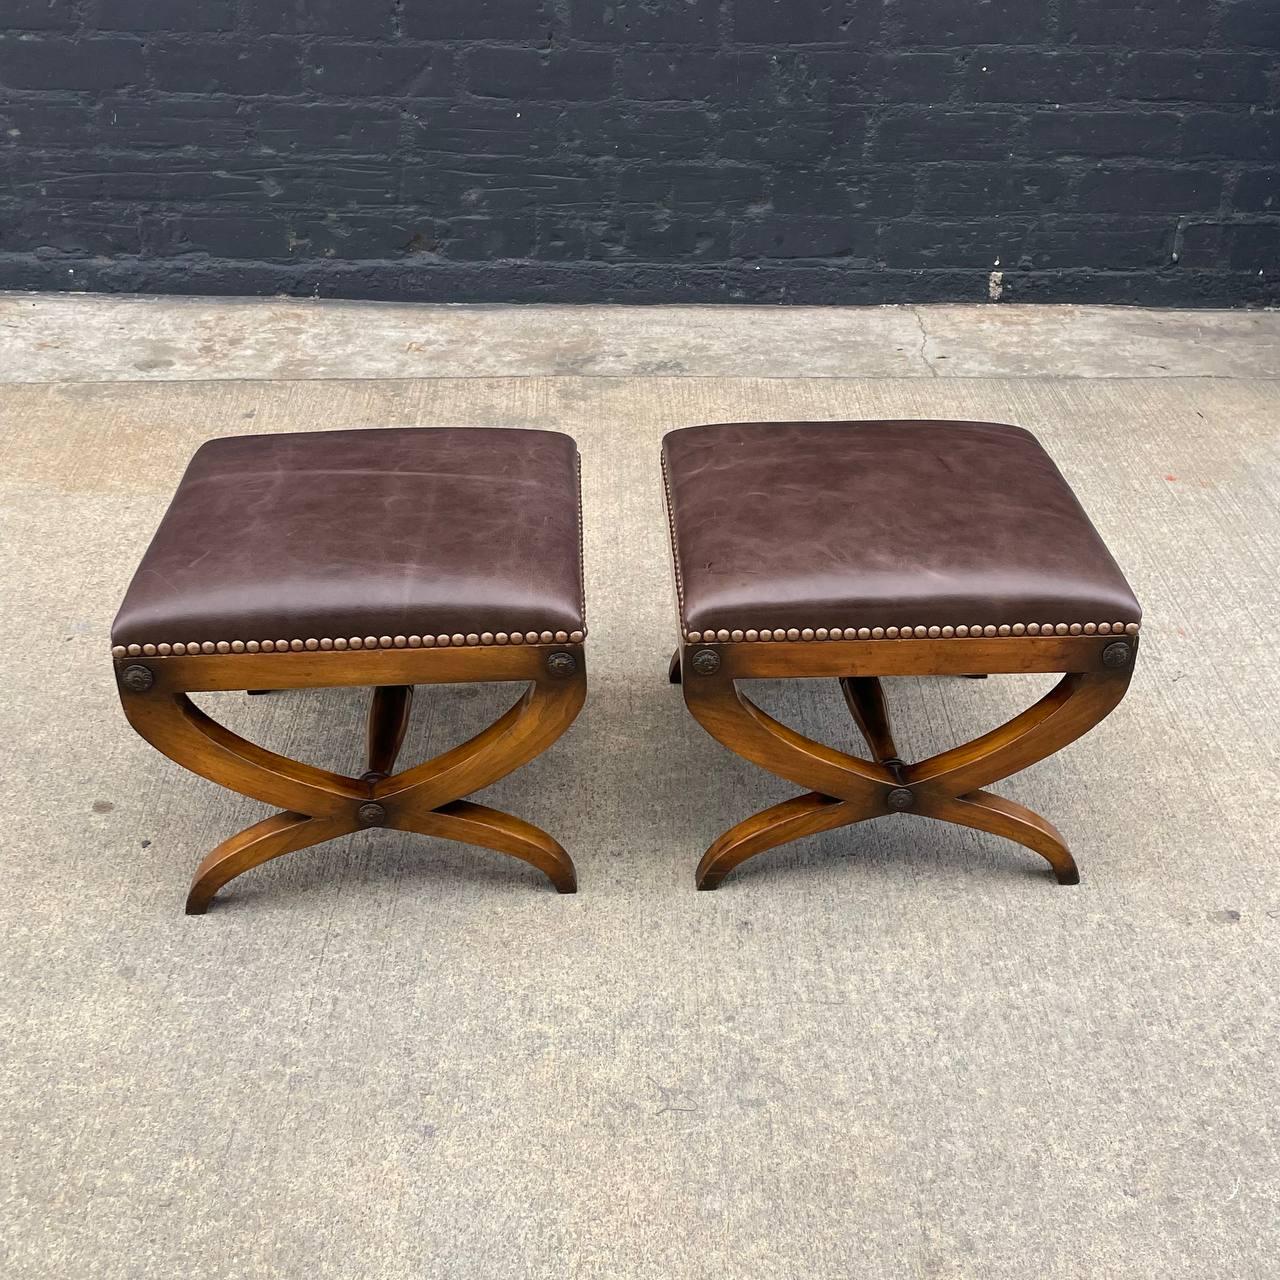 Mid-20th Century Pair of Neoclassical Style Curule Leather Benches For Sale